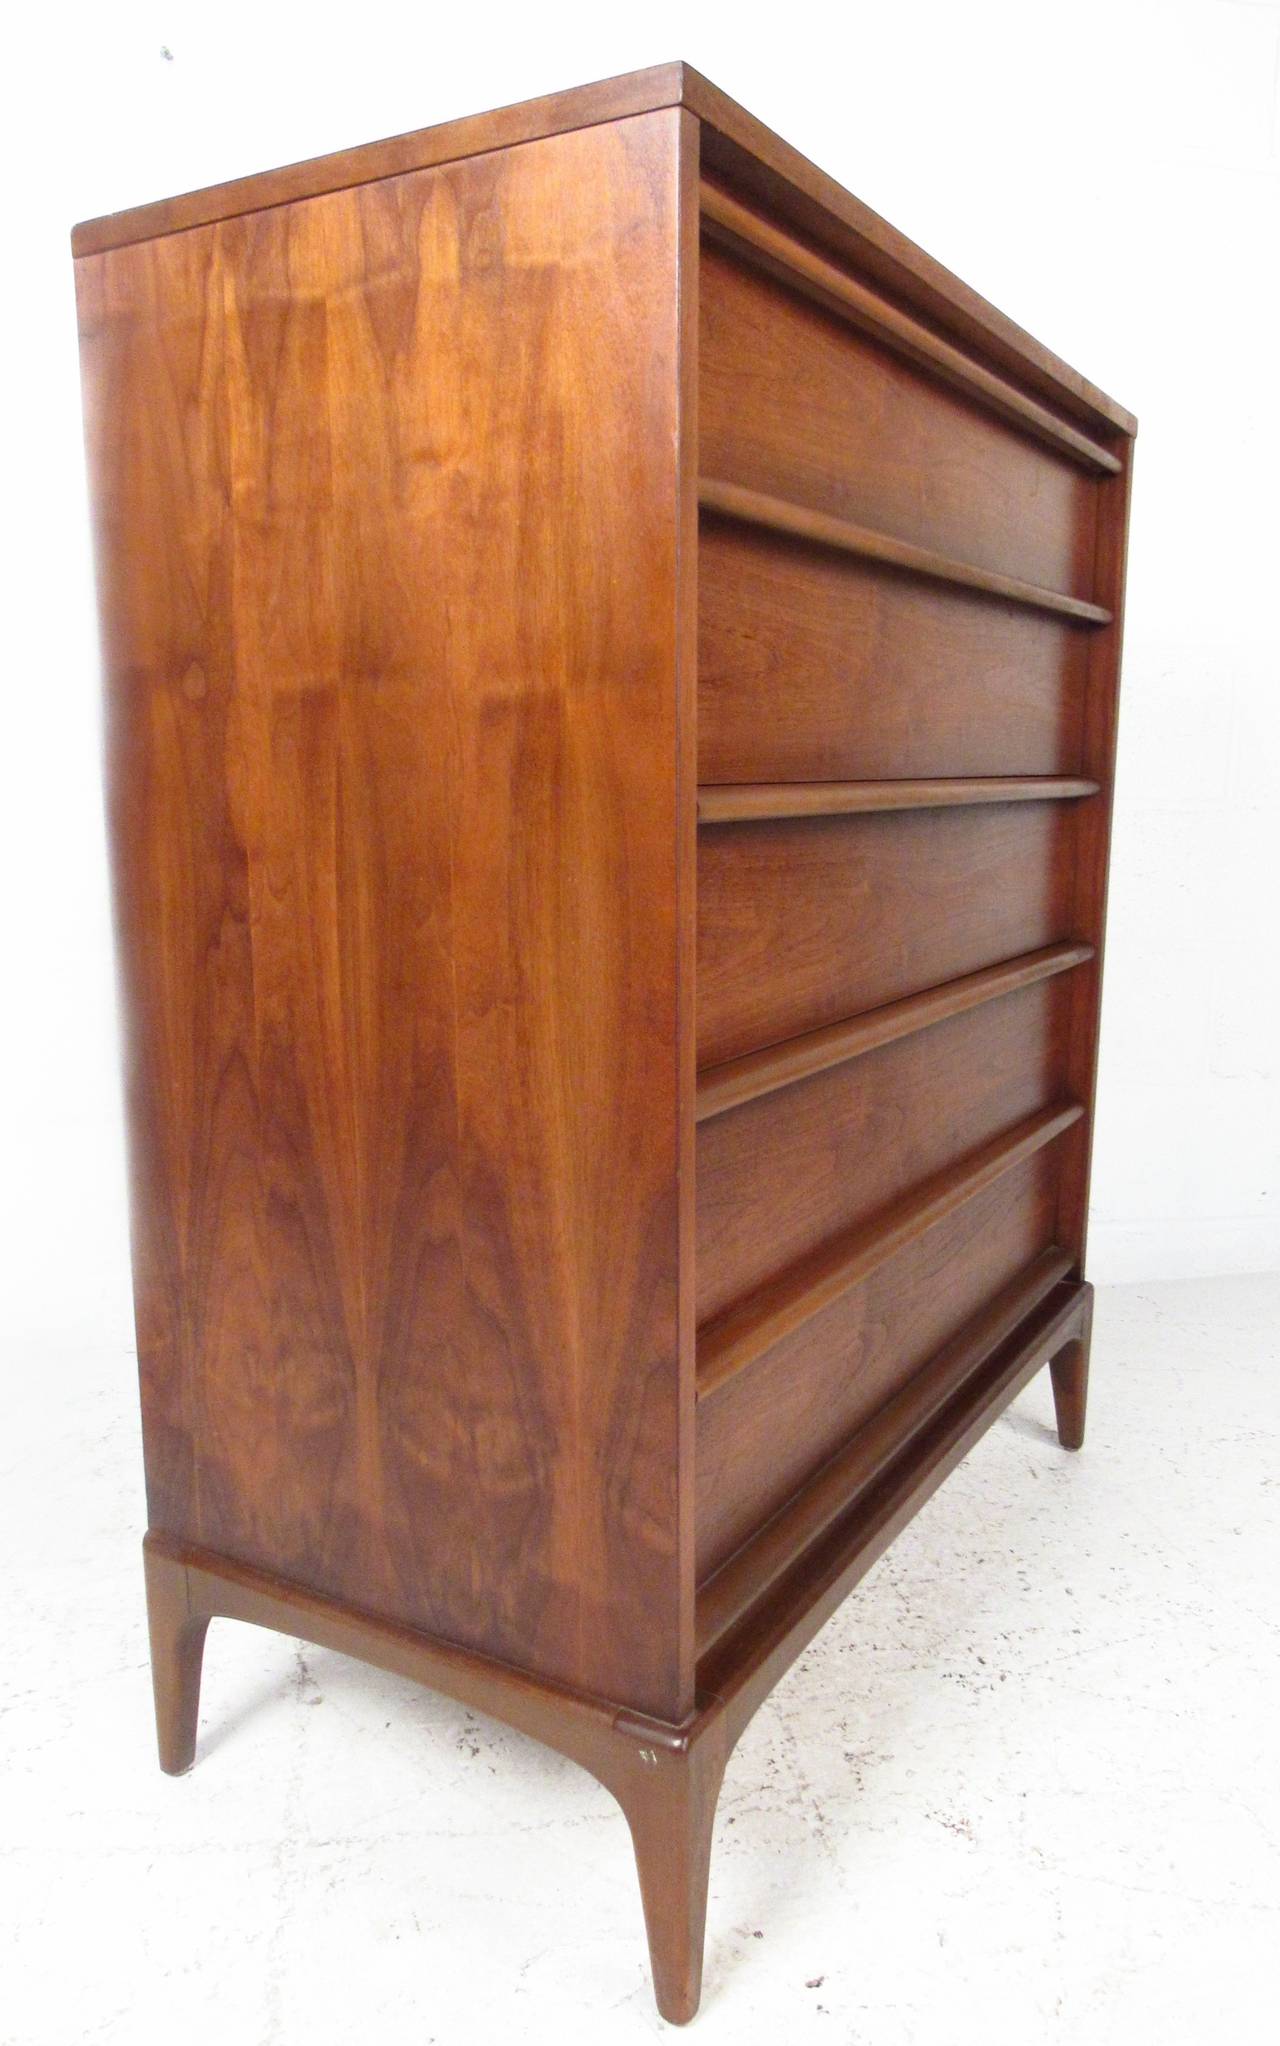 This stylish five-drawer mid-Century bedroom dresser by Lane Furniture features spacious drawers, tapered legs, and a rich walnut finish. Please confirm item location (NY or NJ) with dealer.